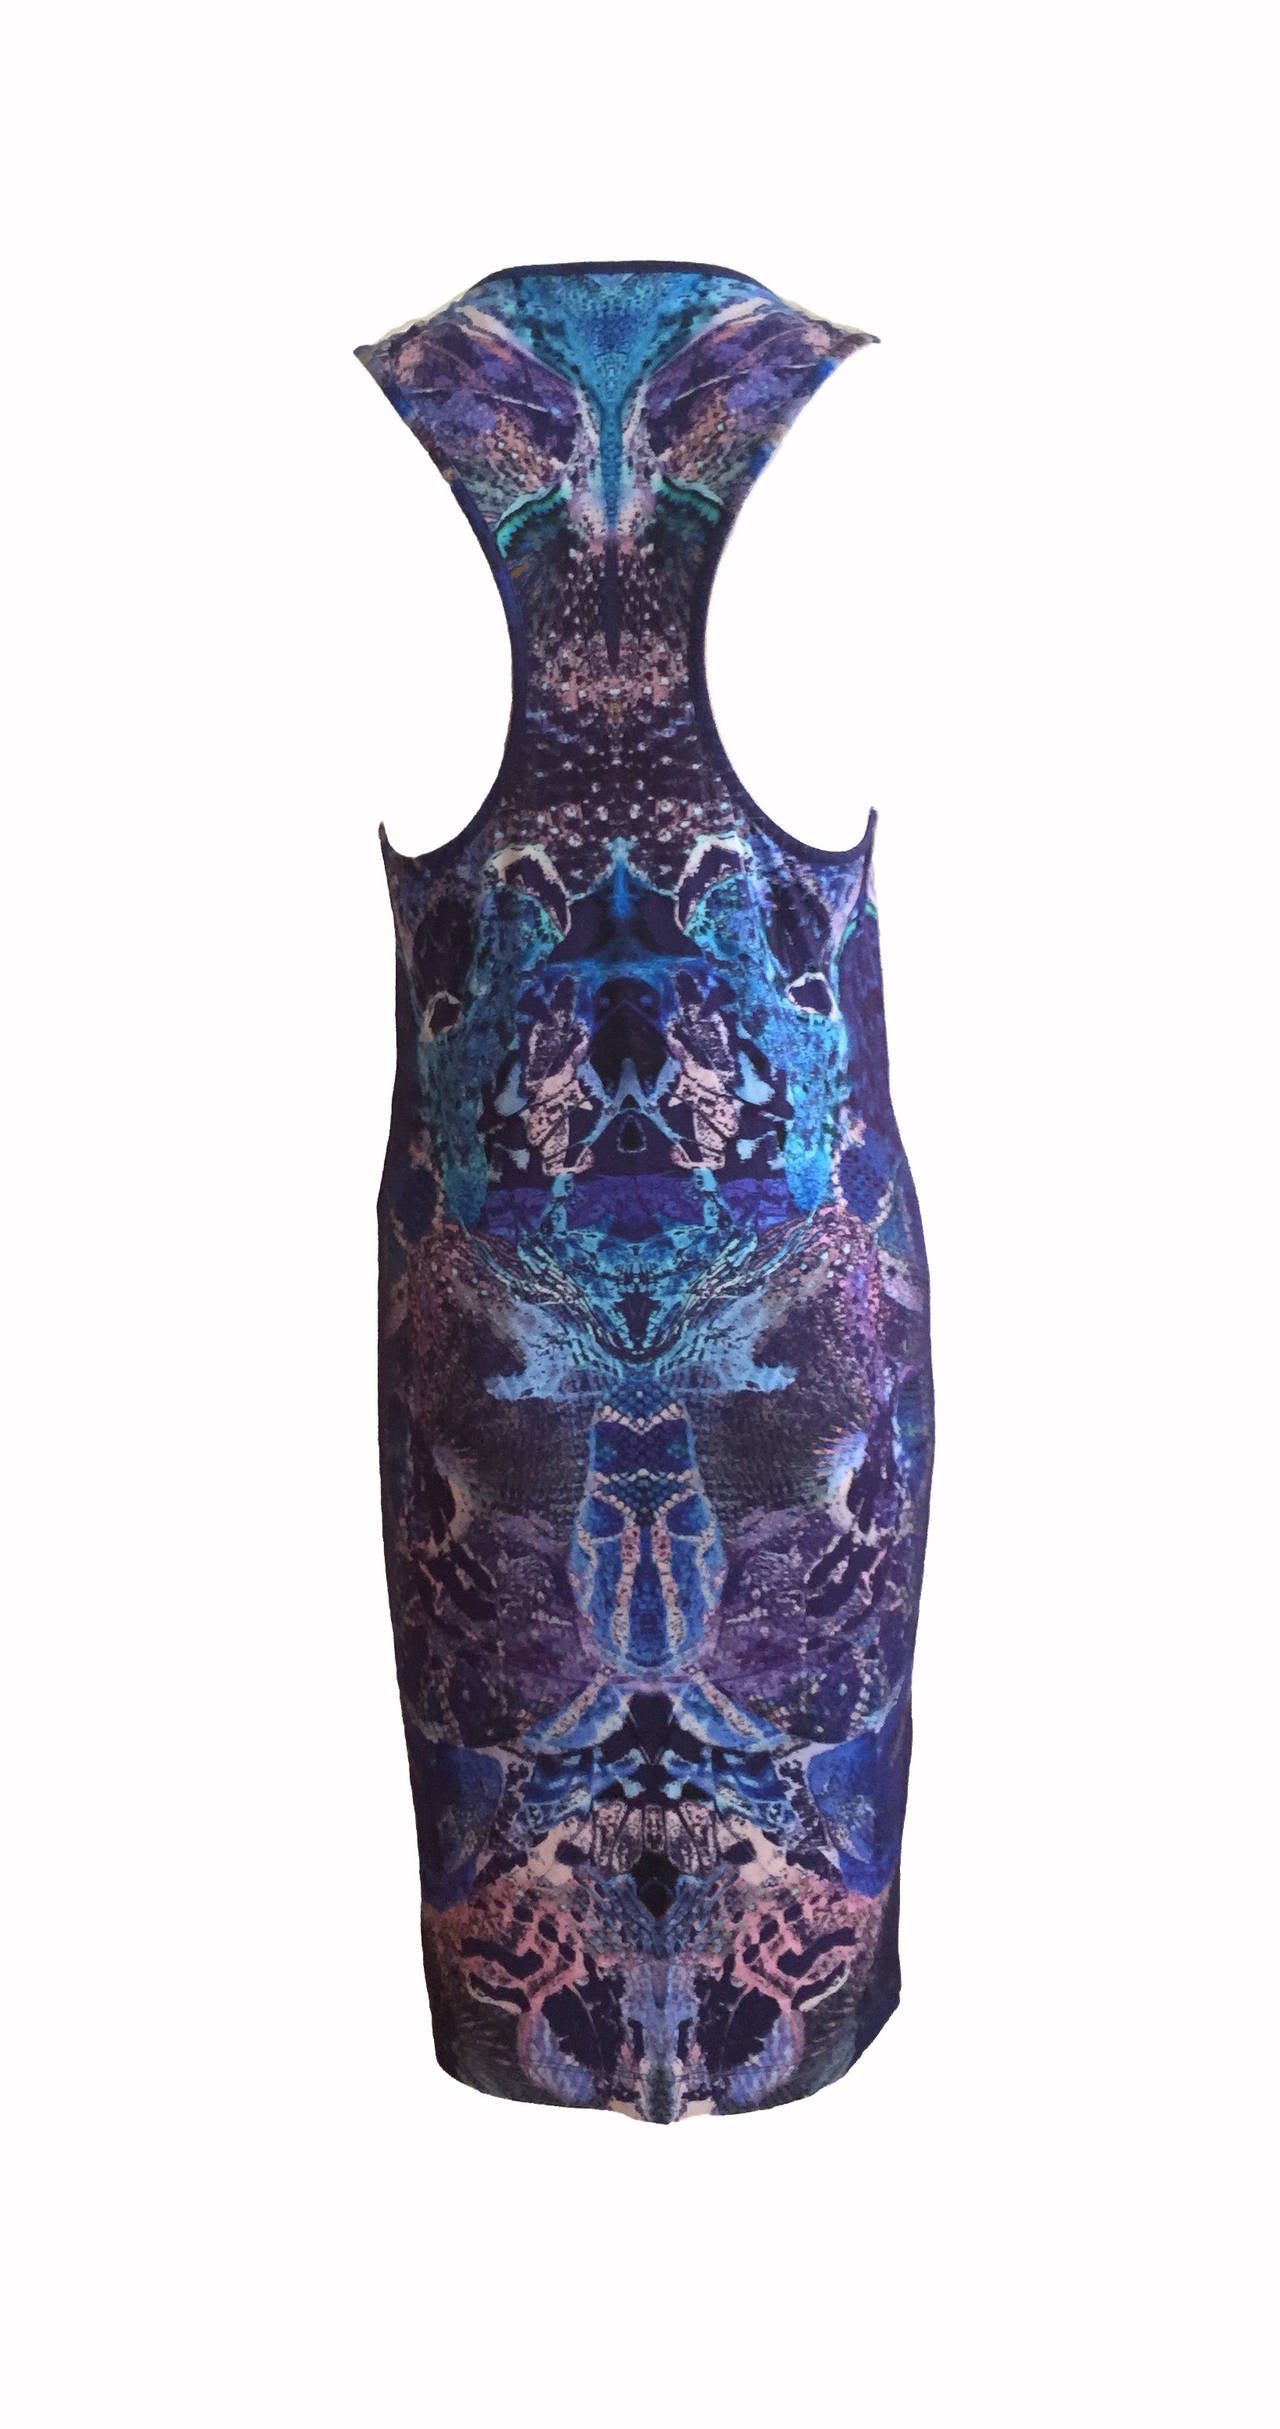 Important Alexander McQueen Dress from Plato's Atlantis SS 2010 In Excellent Condition For Sale In Bethesda, MD